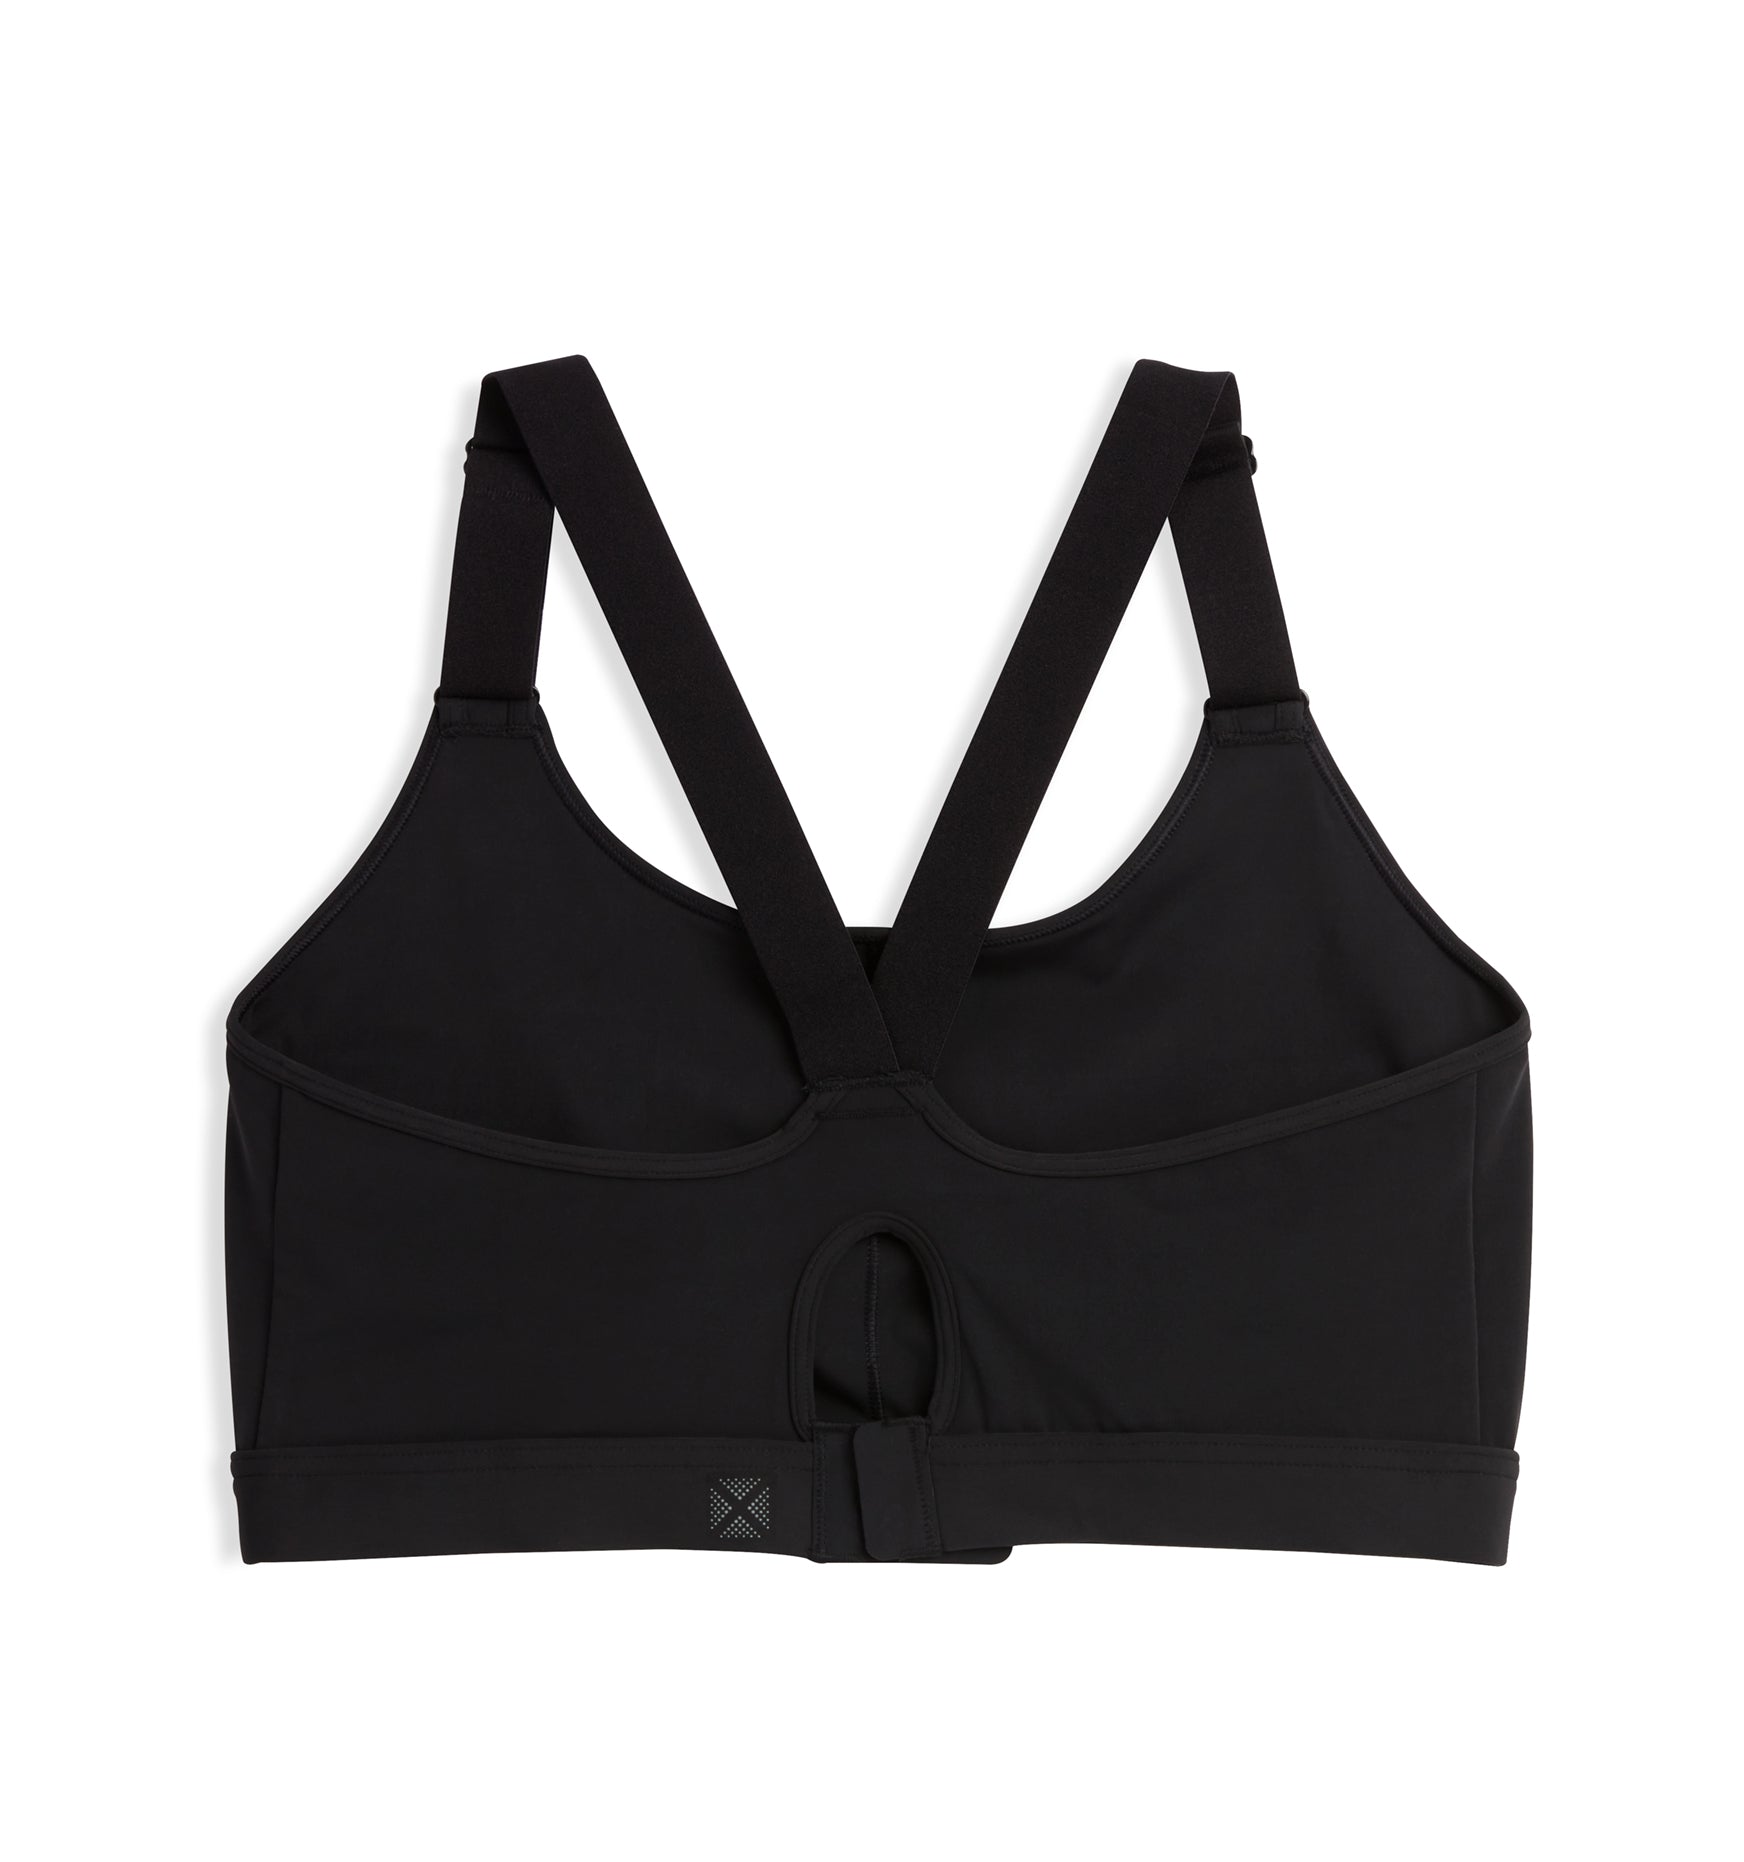 Tomboyx Sports Bra, Medium Impact Support, Athletic Size Inclusive